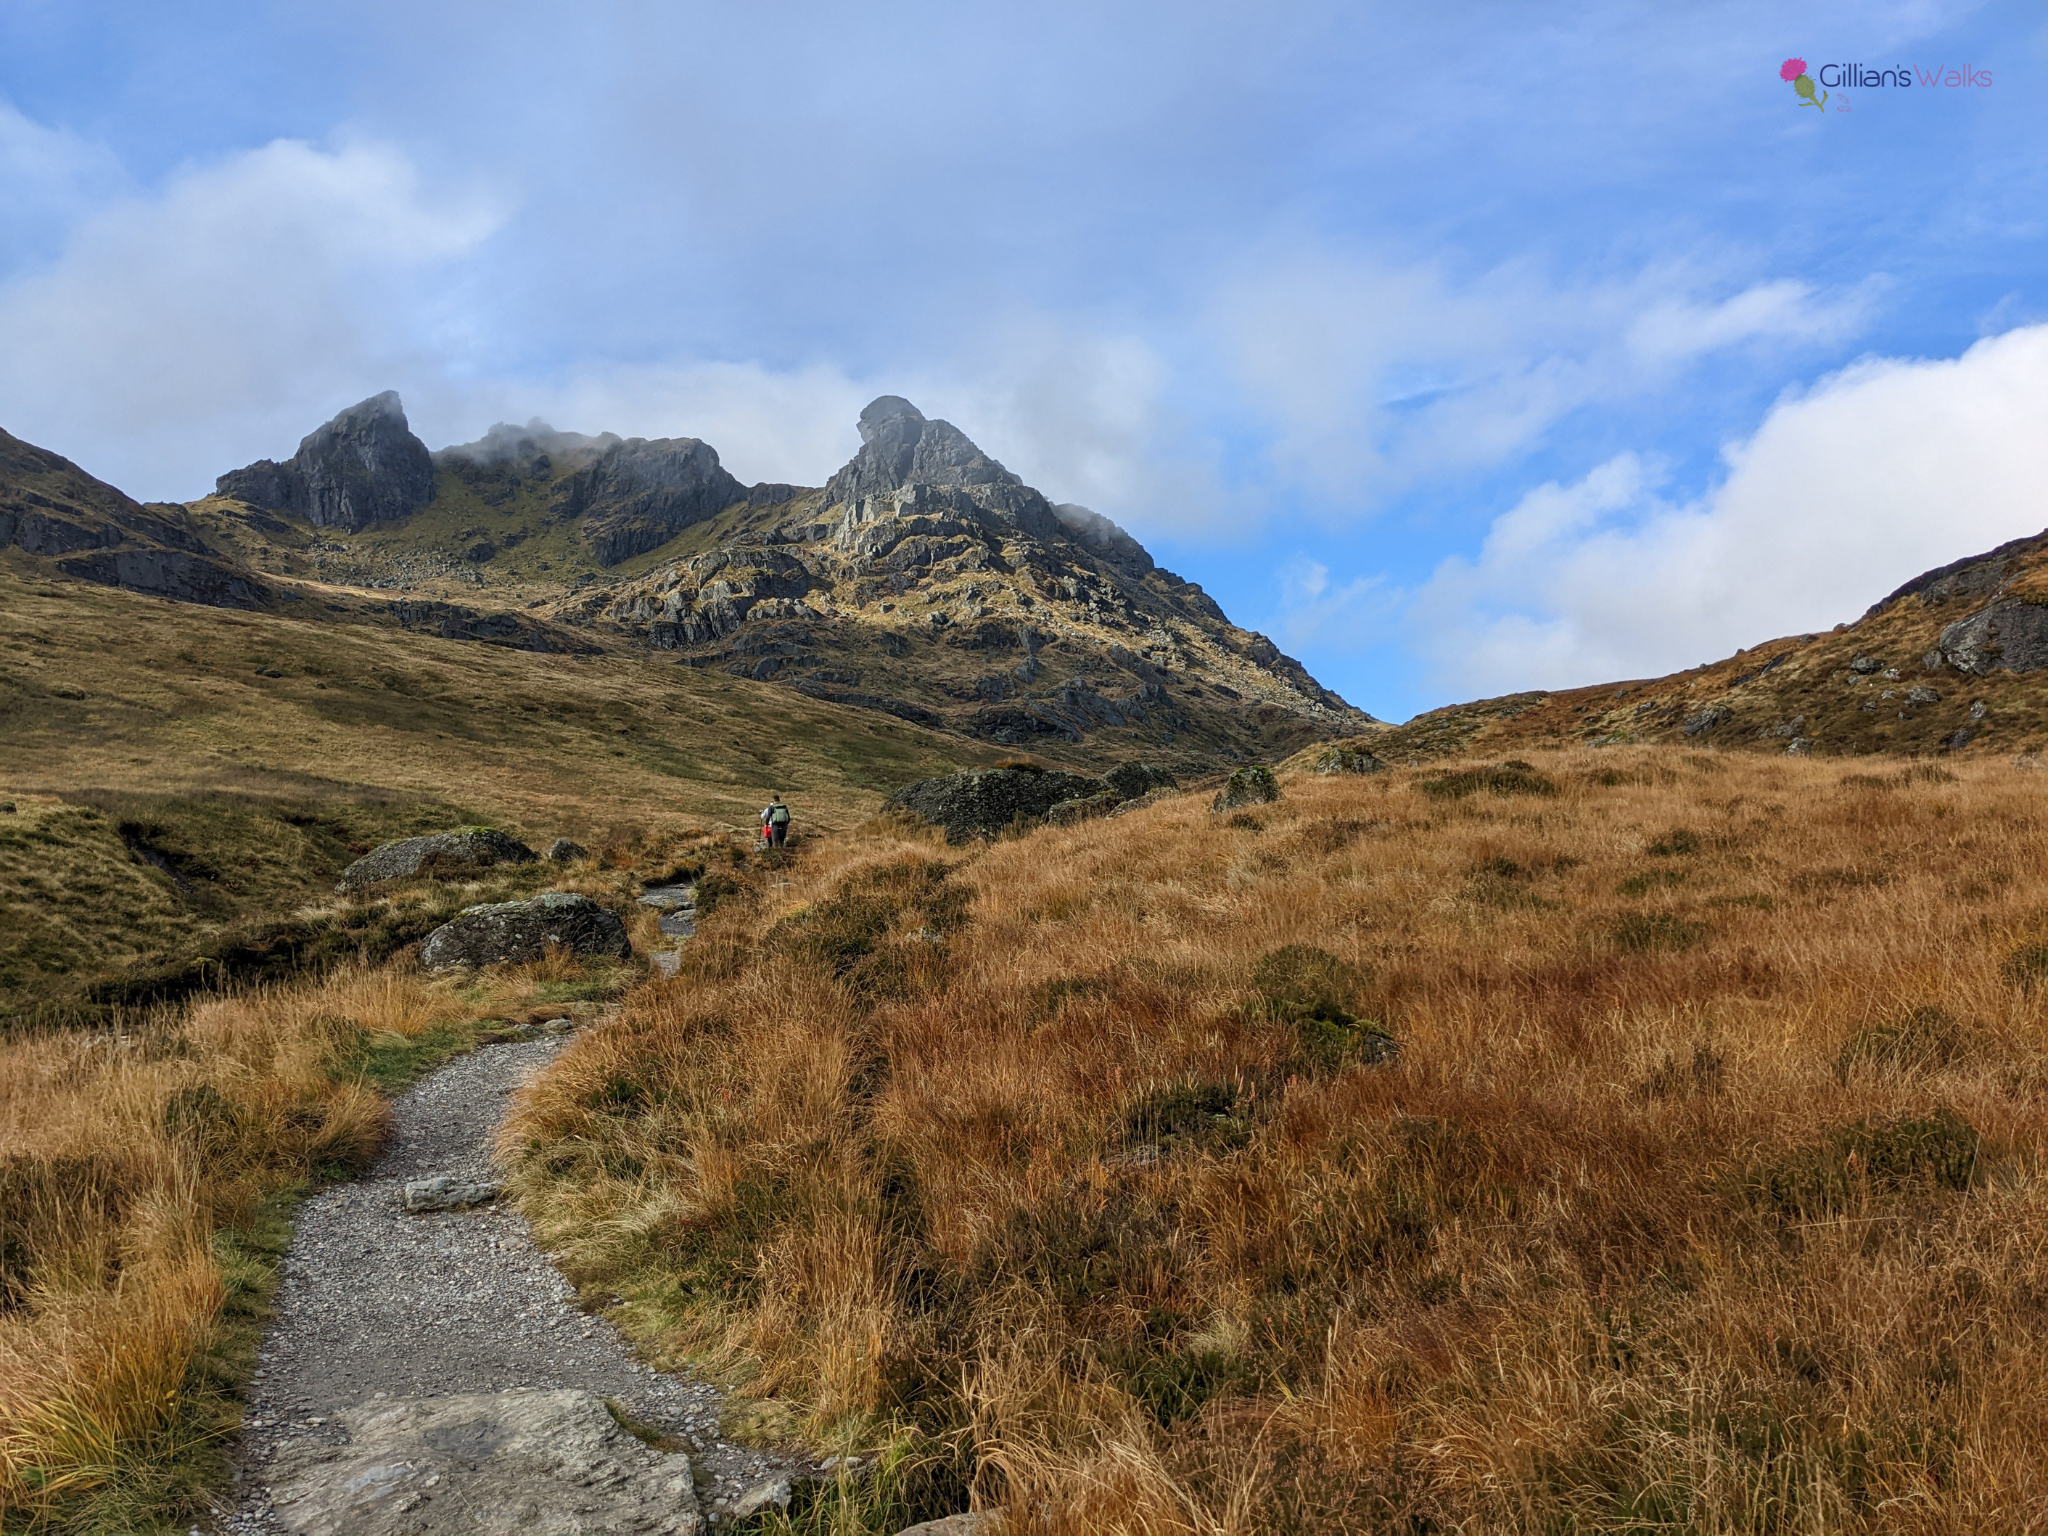 The Cobbler seen from the access path